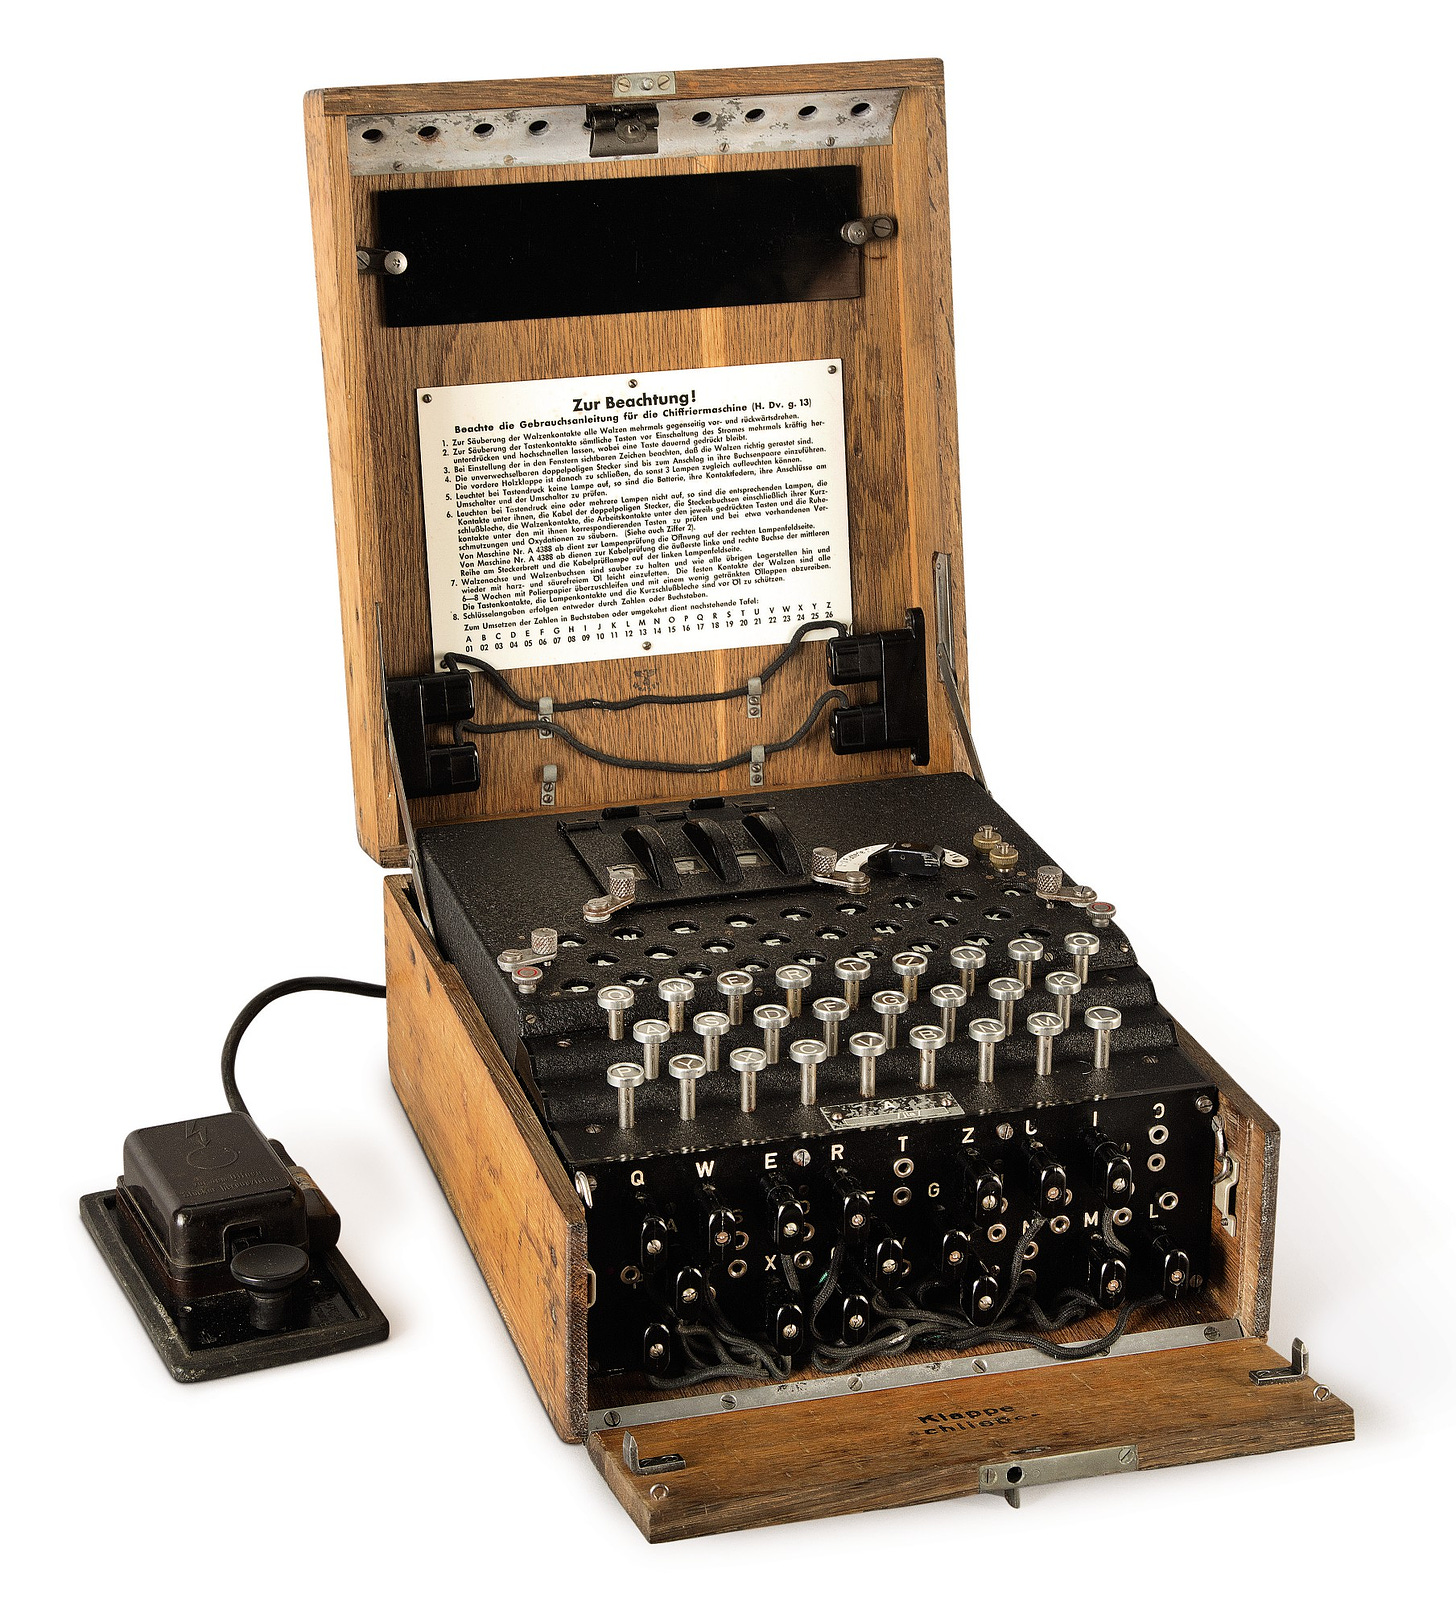 ENIGMA I | A FULLY OPERATIONAL THREE-ROTOR ENIGMA I CIPHER MACHINE. BERLIN:  HEIMSOETH UND RINKE, 1943 | History of Science and Technology, Including  Fossils, Minerals and Meteorites | Books & Manuscripts | Sotheby's